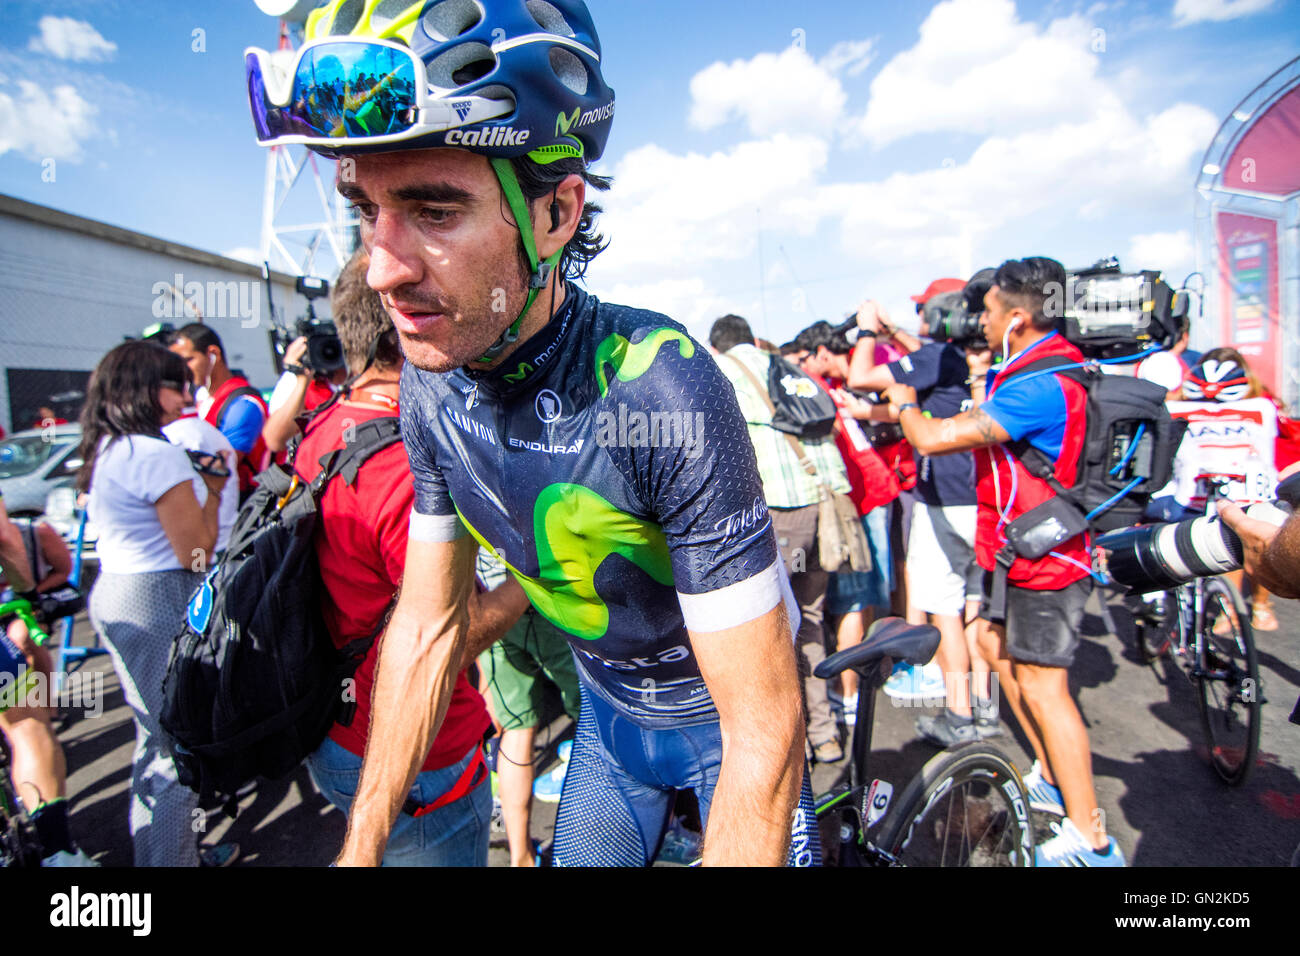 La Camperona, Spain. 27th August, 2016. Daniel Moreno (Movistar Team) finishes the 8th stage of cycling race ‘La Vuelta a España’ (Tour of Spain) between Villalpando and Climb of La Camperona on August 27, 2016 in Leon, Spain. Credit: David Gato/Alamy Live News Stock Photo